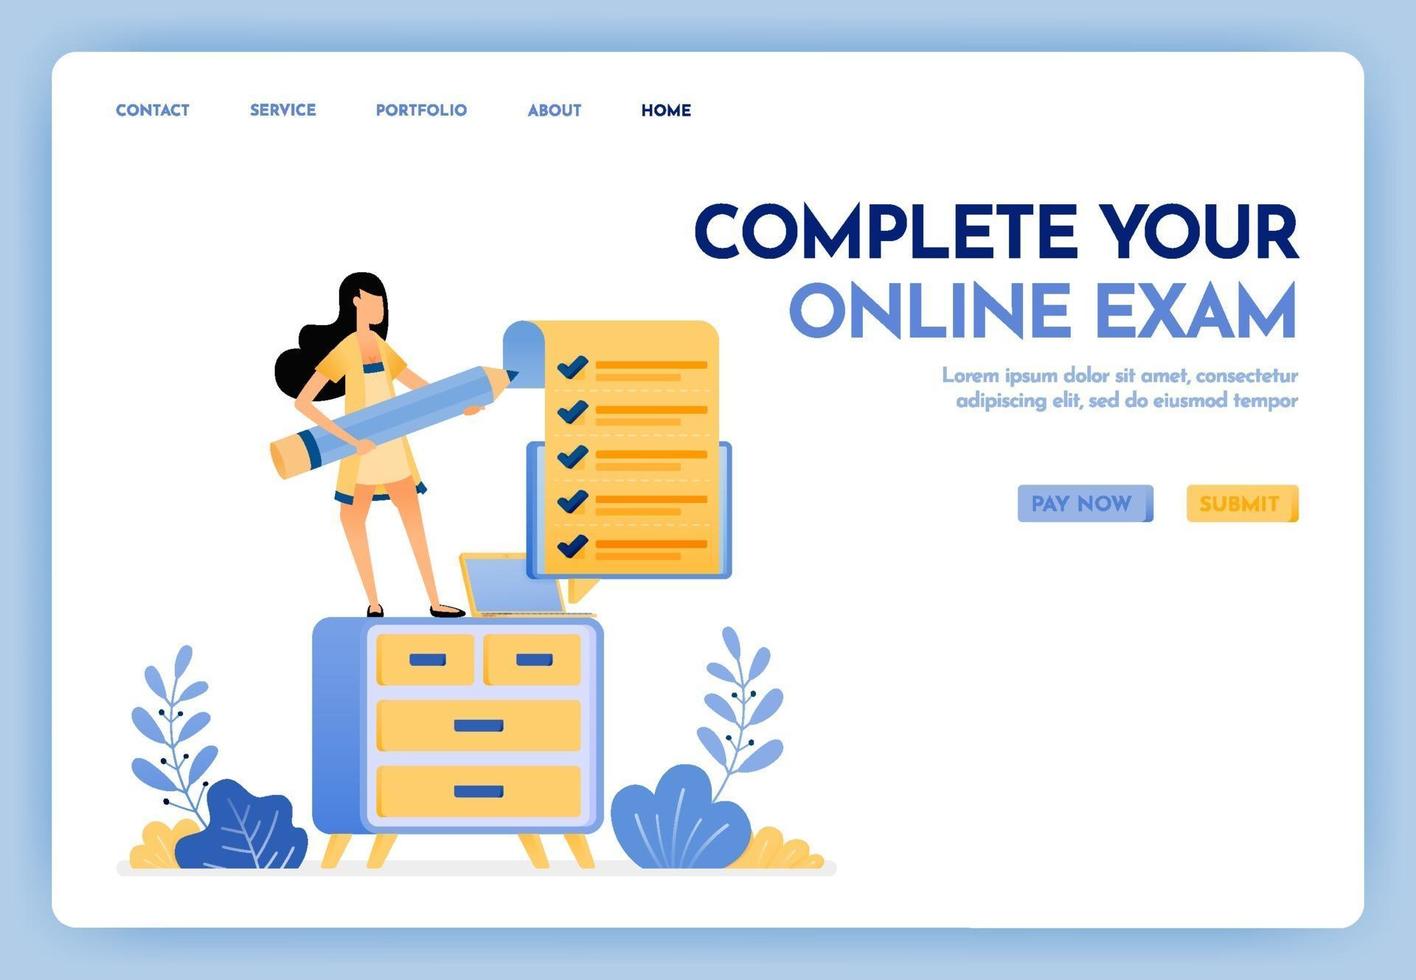 Illustration of work at home. Freelance woman holding a pencil and completing online exam or survey. Study at home with a laptop. Design concept for banner, landing page, web, website, poster, ui ux vector